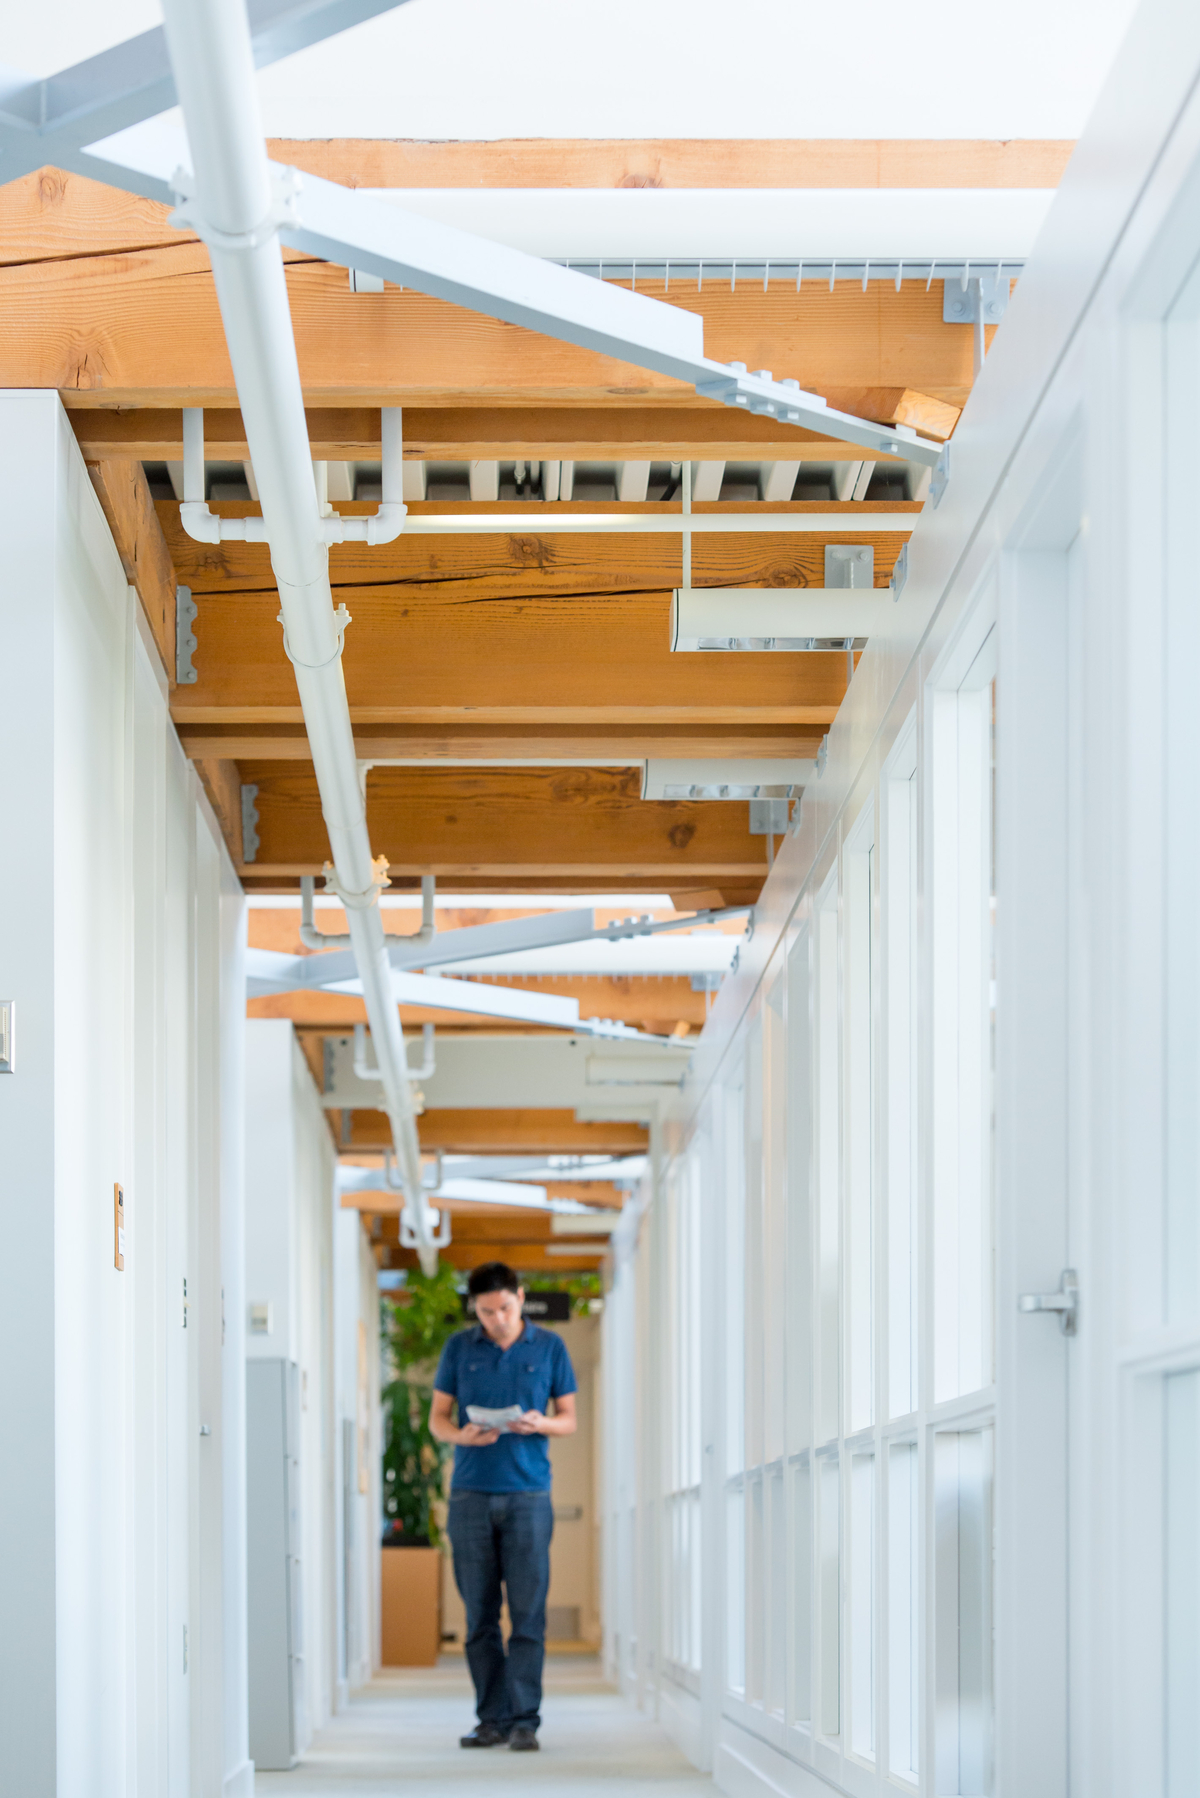 solid-sawn heavy timber beams and columns, with associated metal mating plates, and shown in this occupied main hallway image at the UBC CK Choi Building